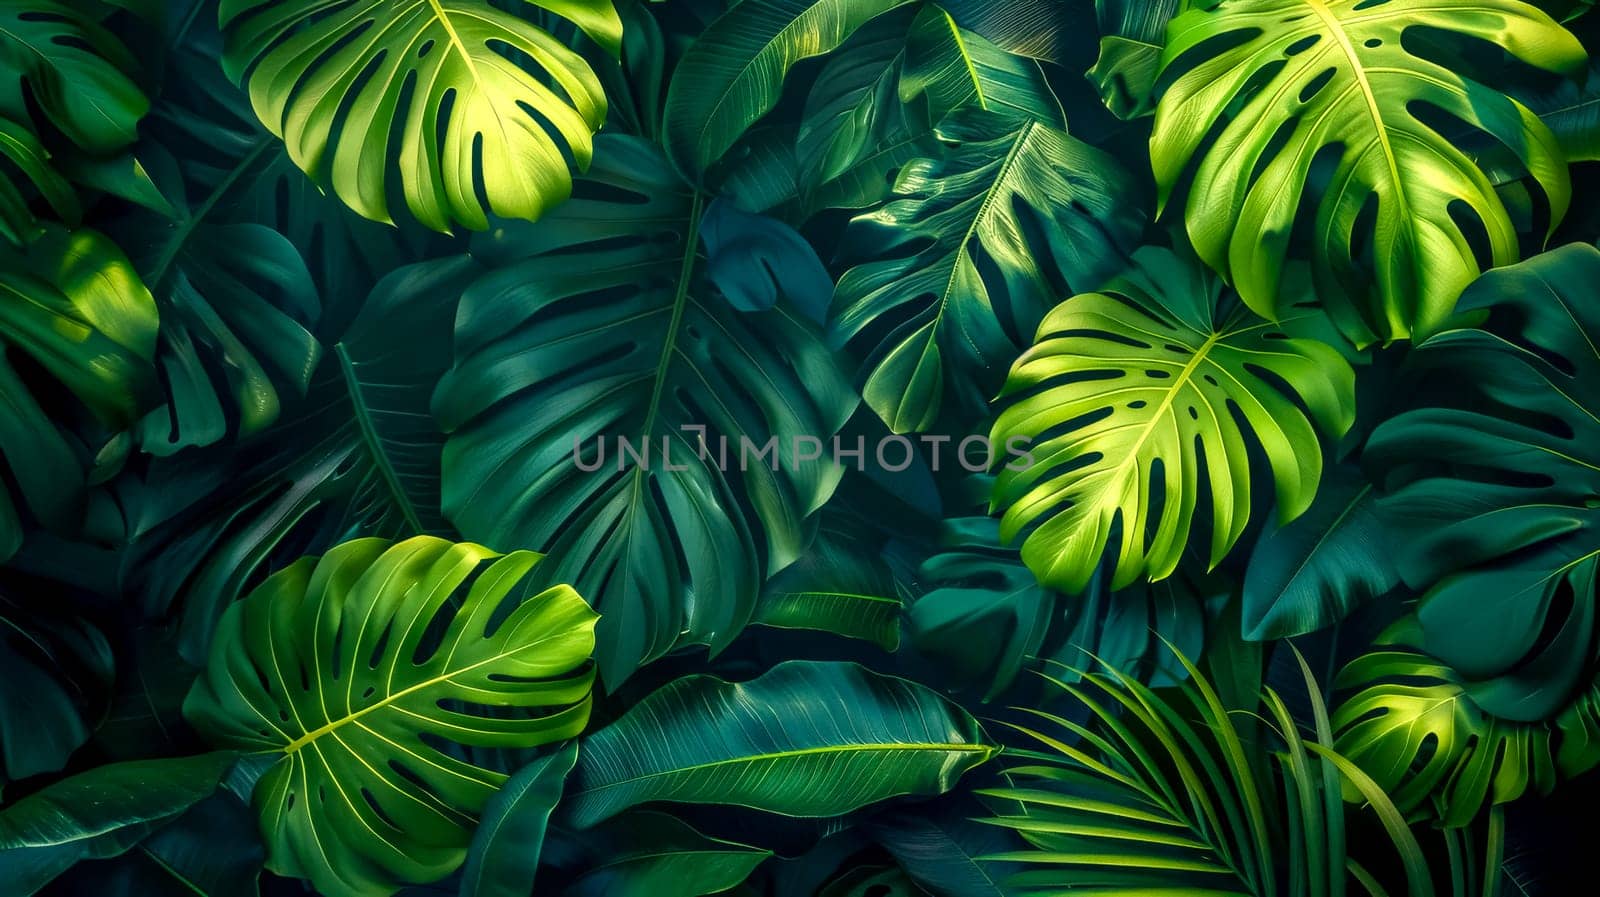 Vibrant, detailed view of dense tropical foliage with monstera leaves